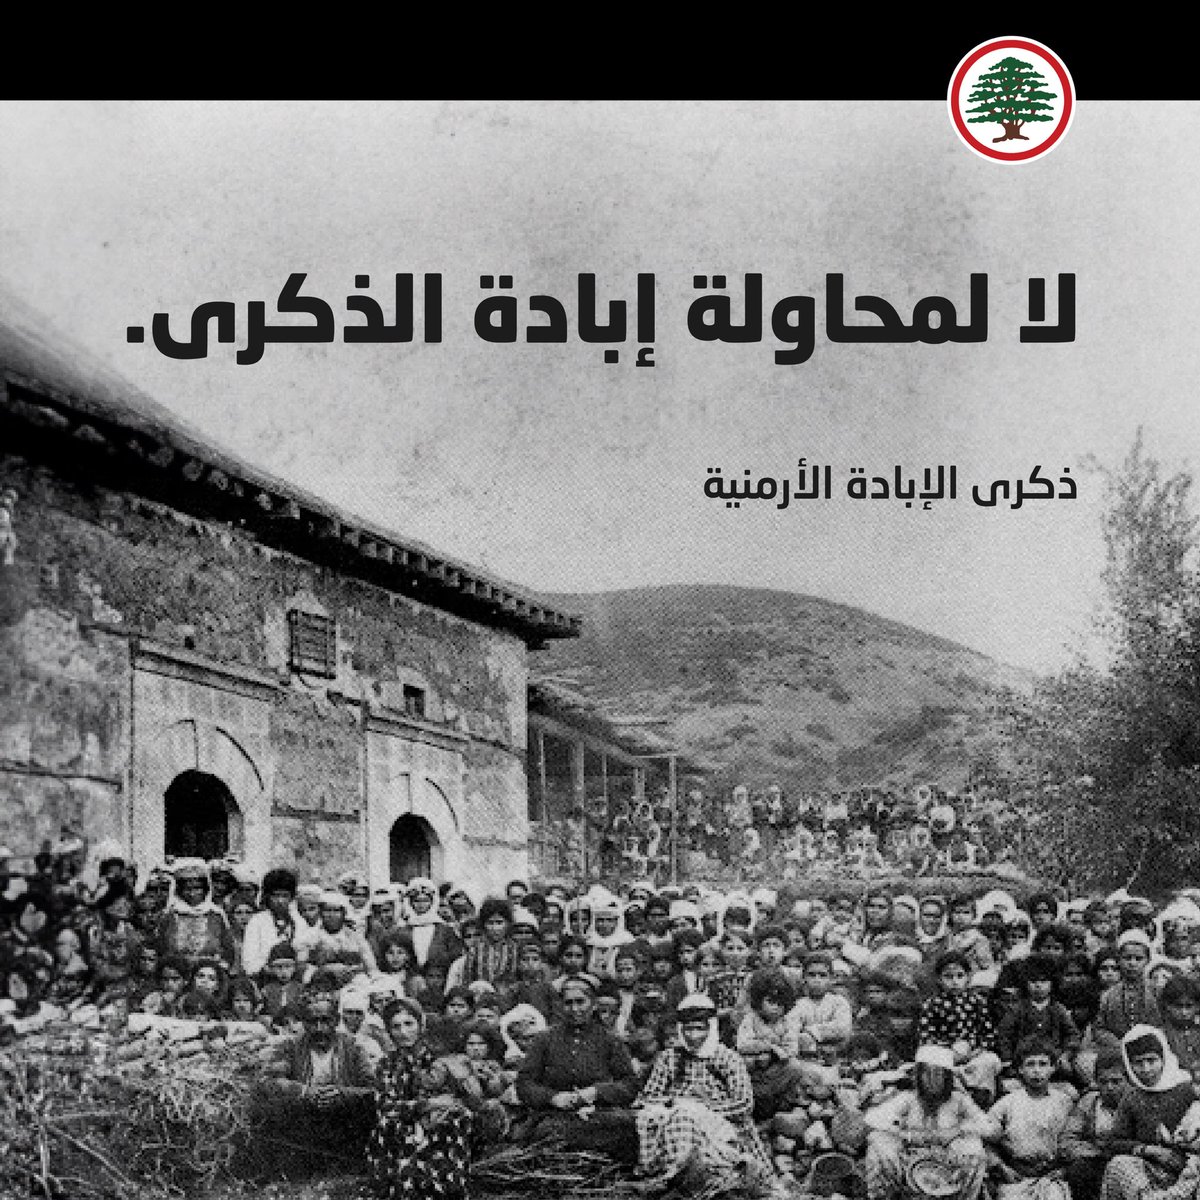 Today, we remember and commemorate 3 genocides committed by the Islamist turks of the Ottoman Empire:

200k Lebanese Christians (Mt Lebanon, mostly Maronites
The Kafno genocide
🇱🇧✝️

300k Assyrian Christians
The Seyfo Genocide 
🇮🇶✝️

1.5m Armenian Christians
🇦🇲✝️